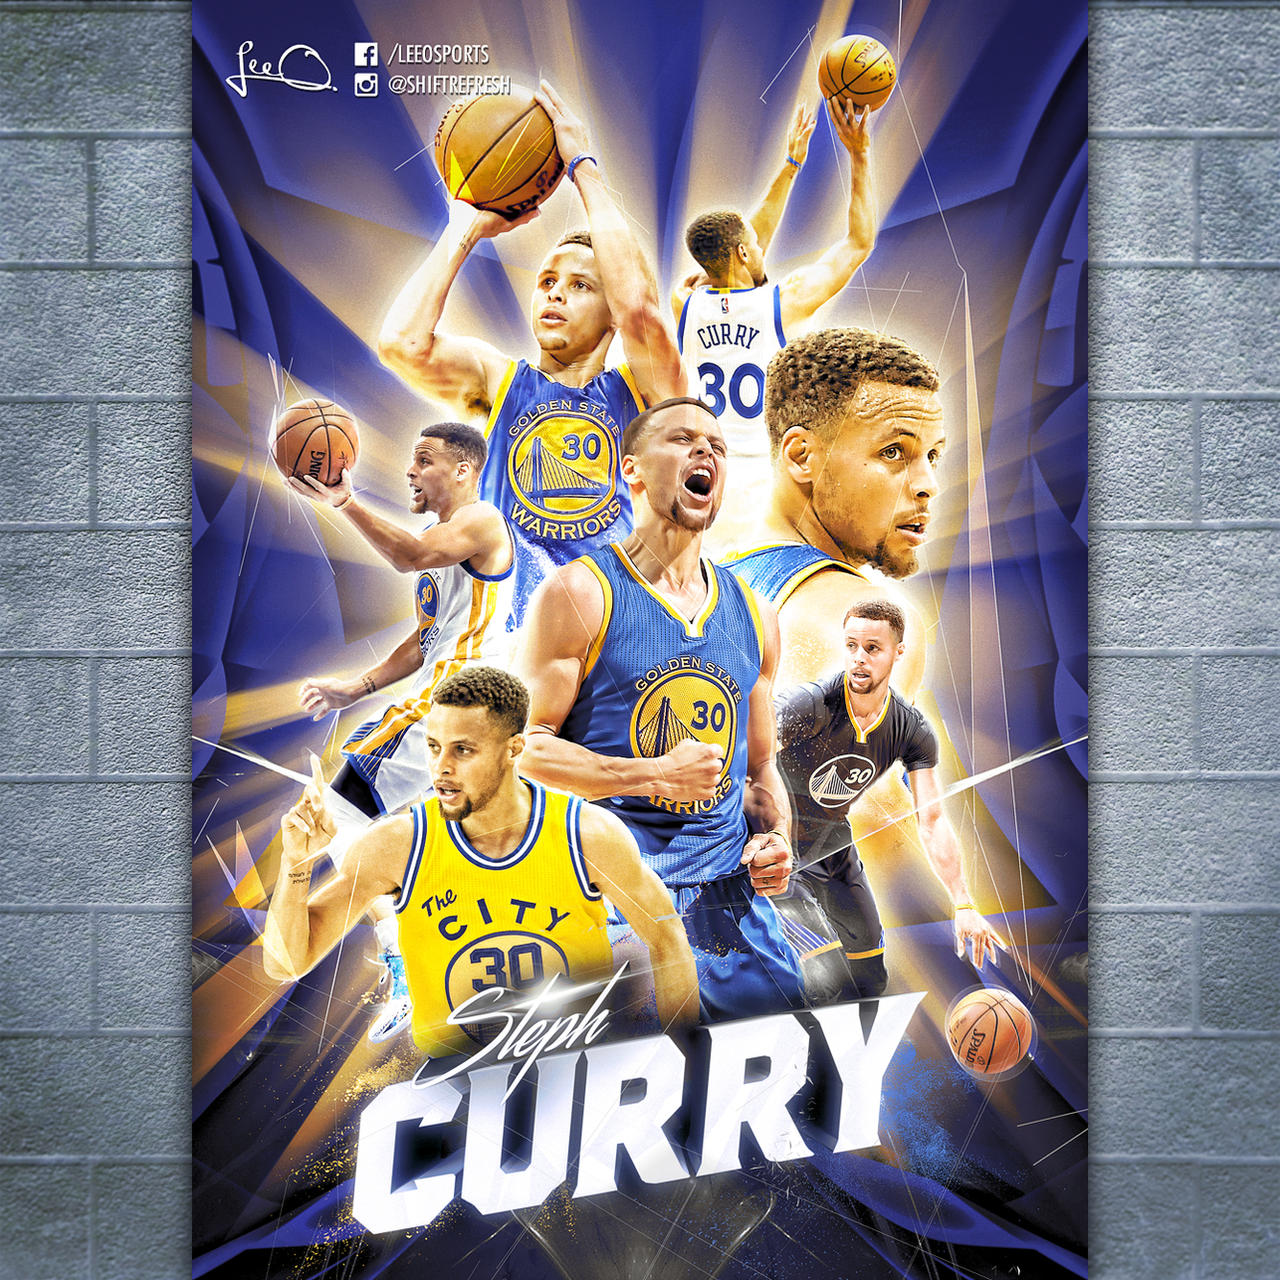 Steph Curry Poster Design by skythlee on DeviantArt